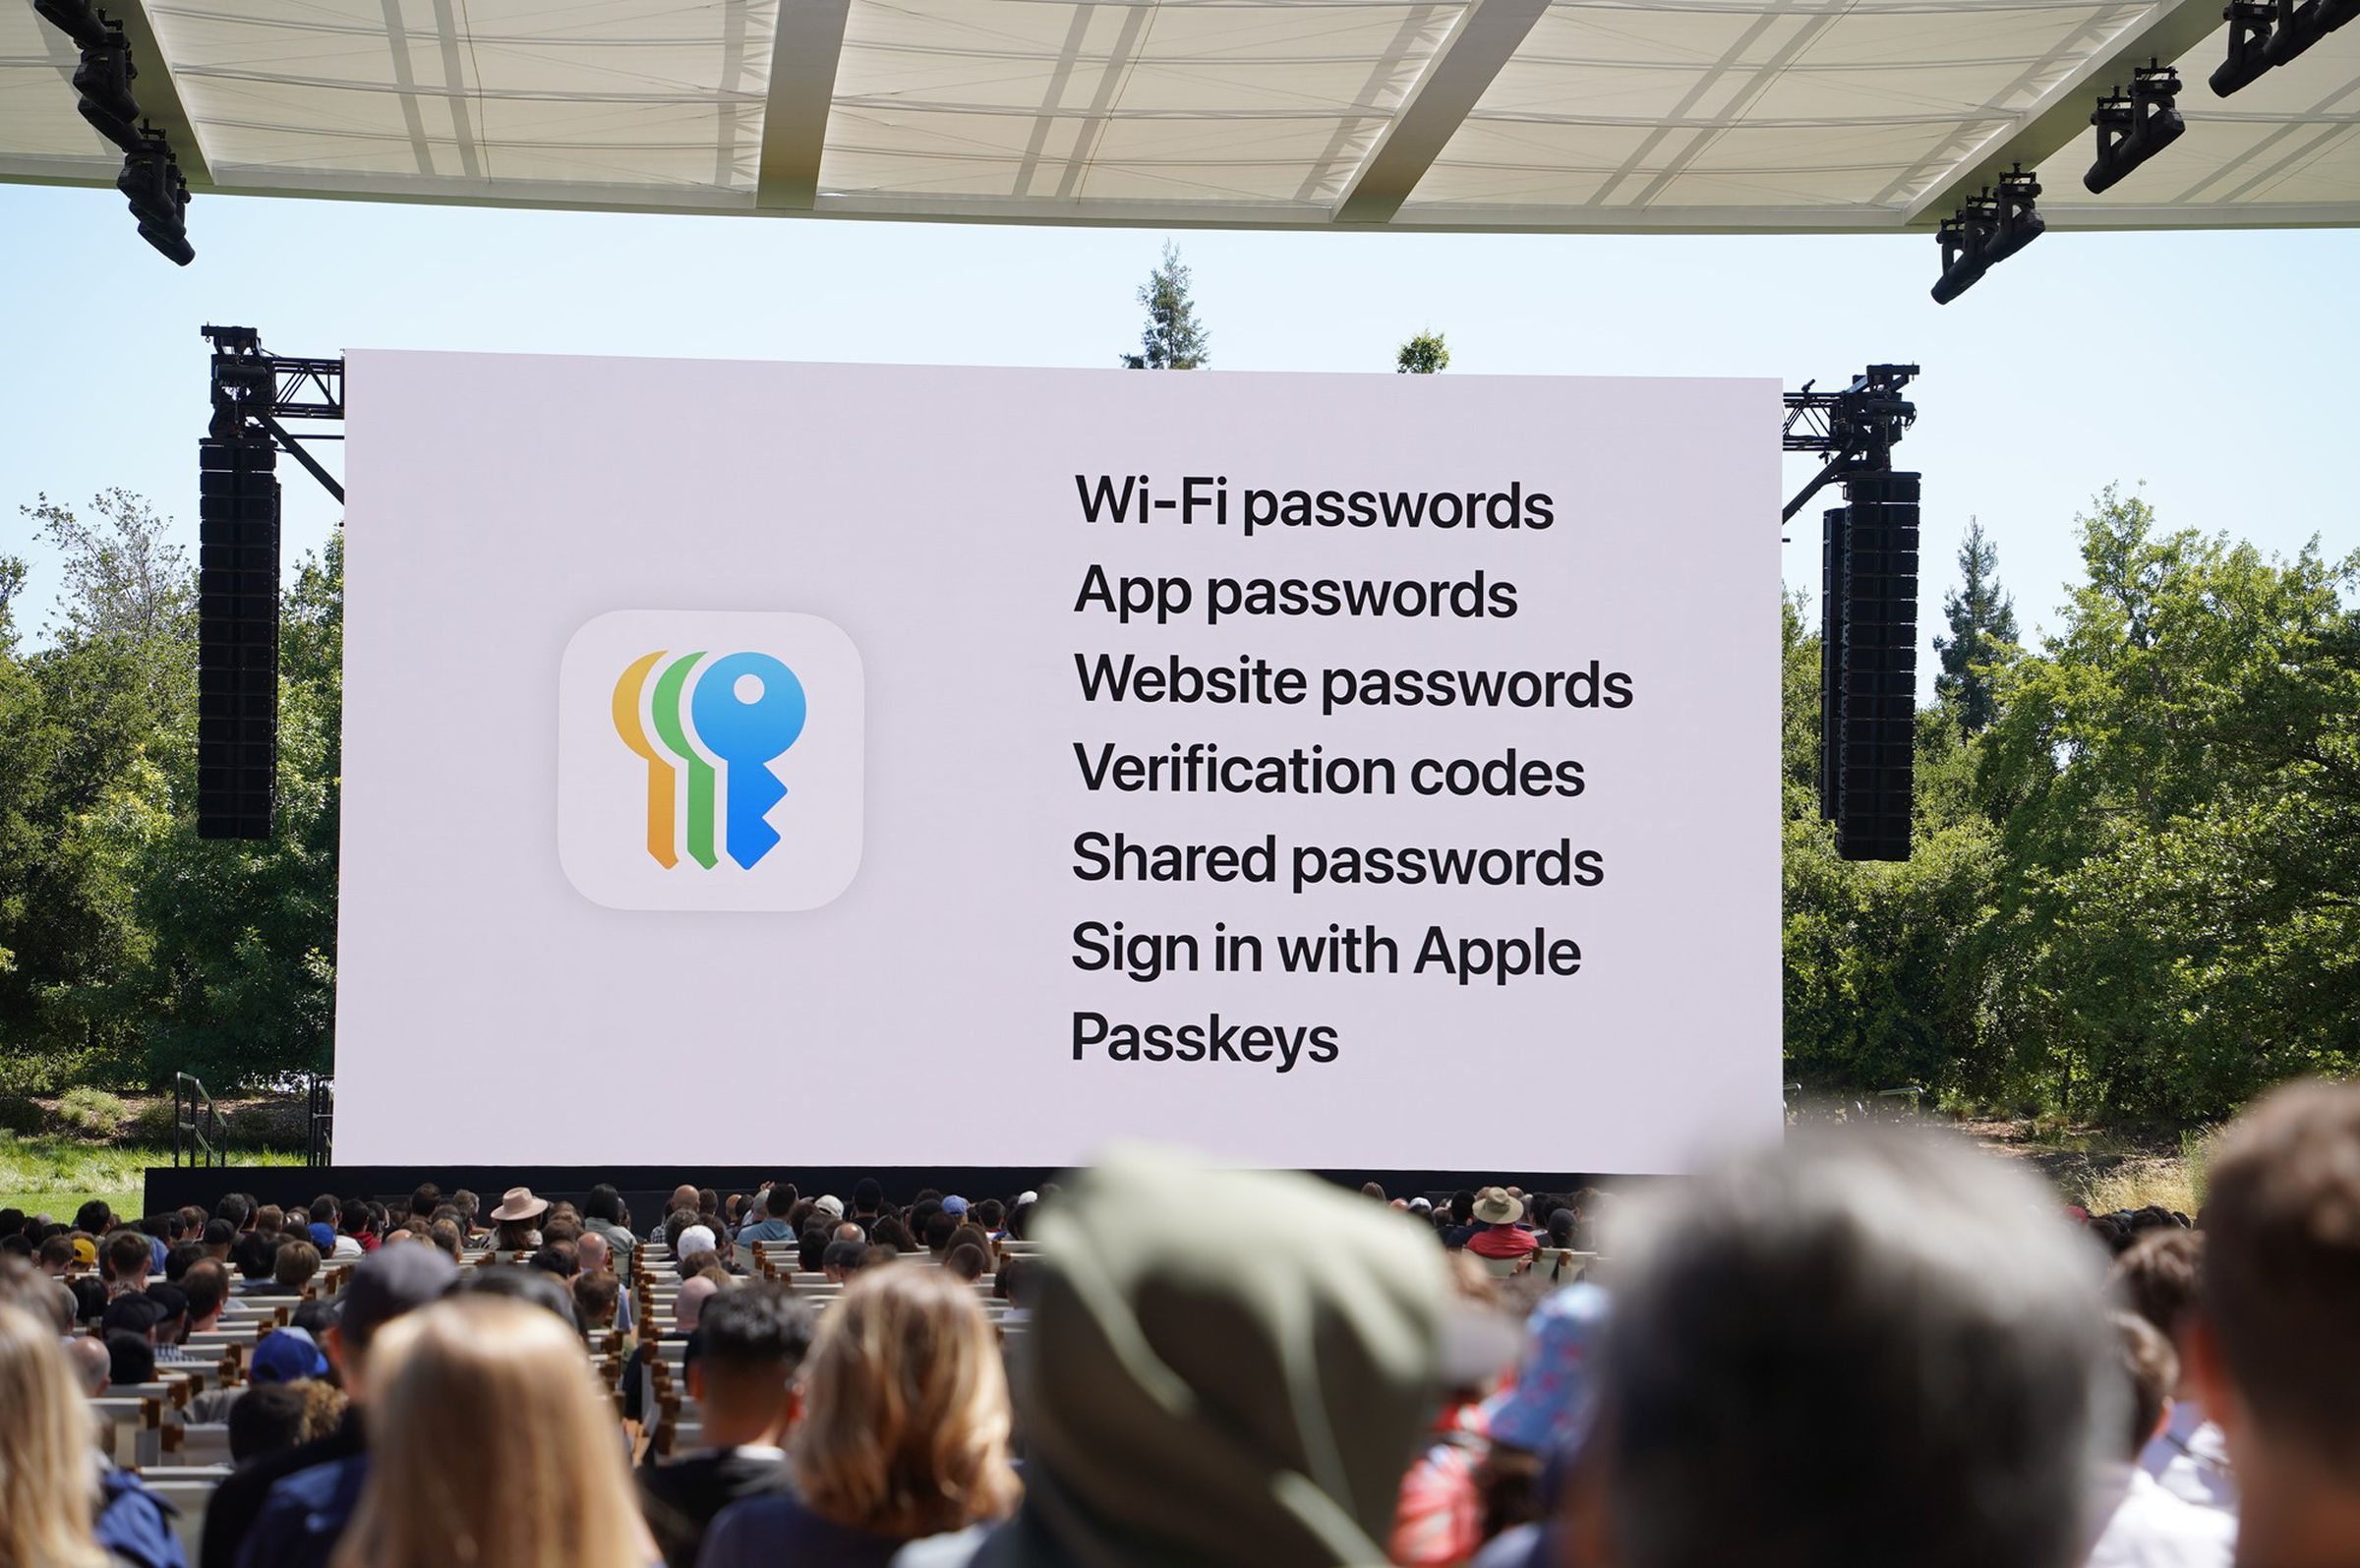 Slide showing: Wifi passwords, app passwords, website passwords, verification codes, shared passwords, sign in with Apple, and passkeys